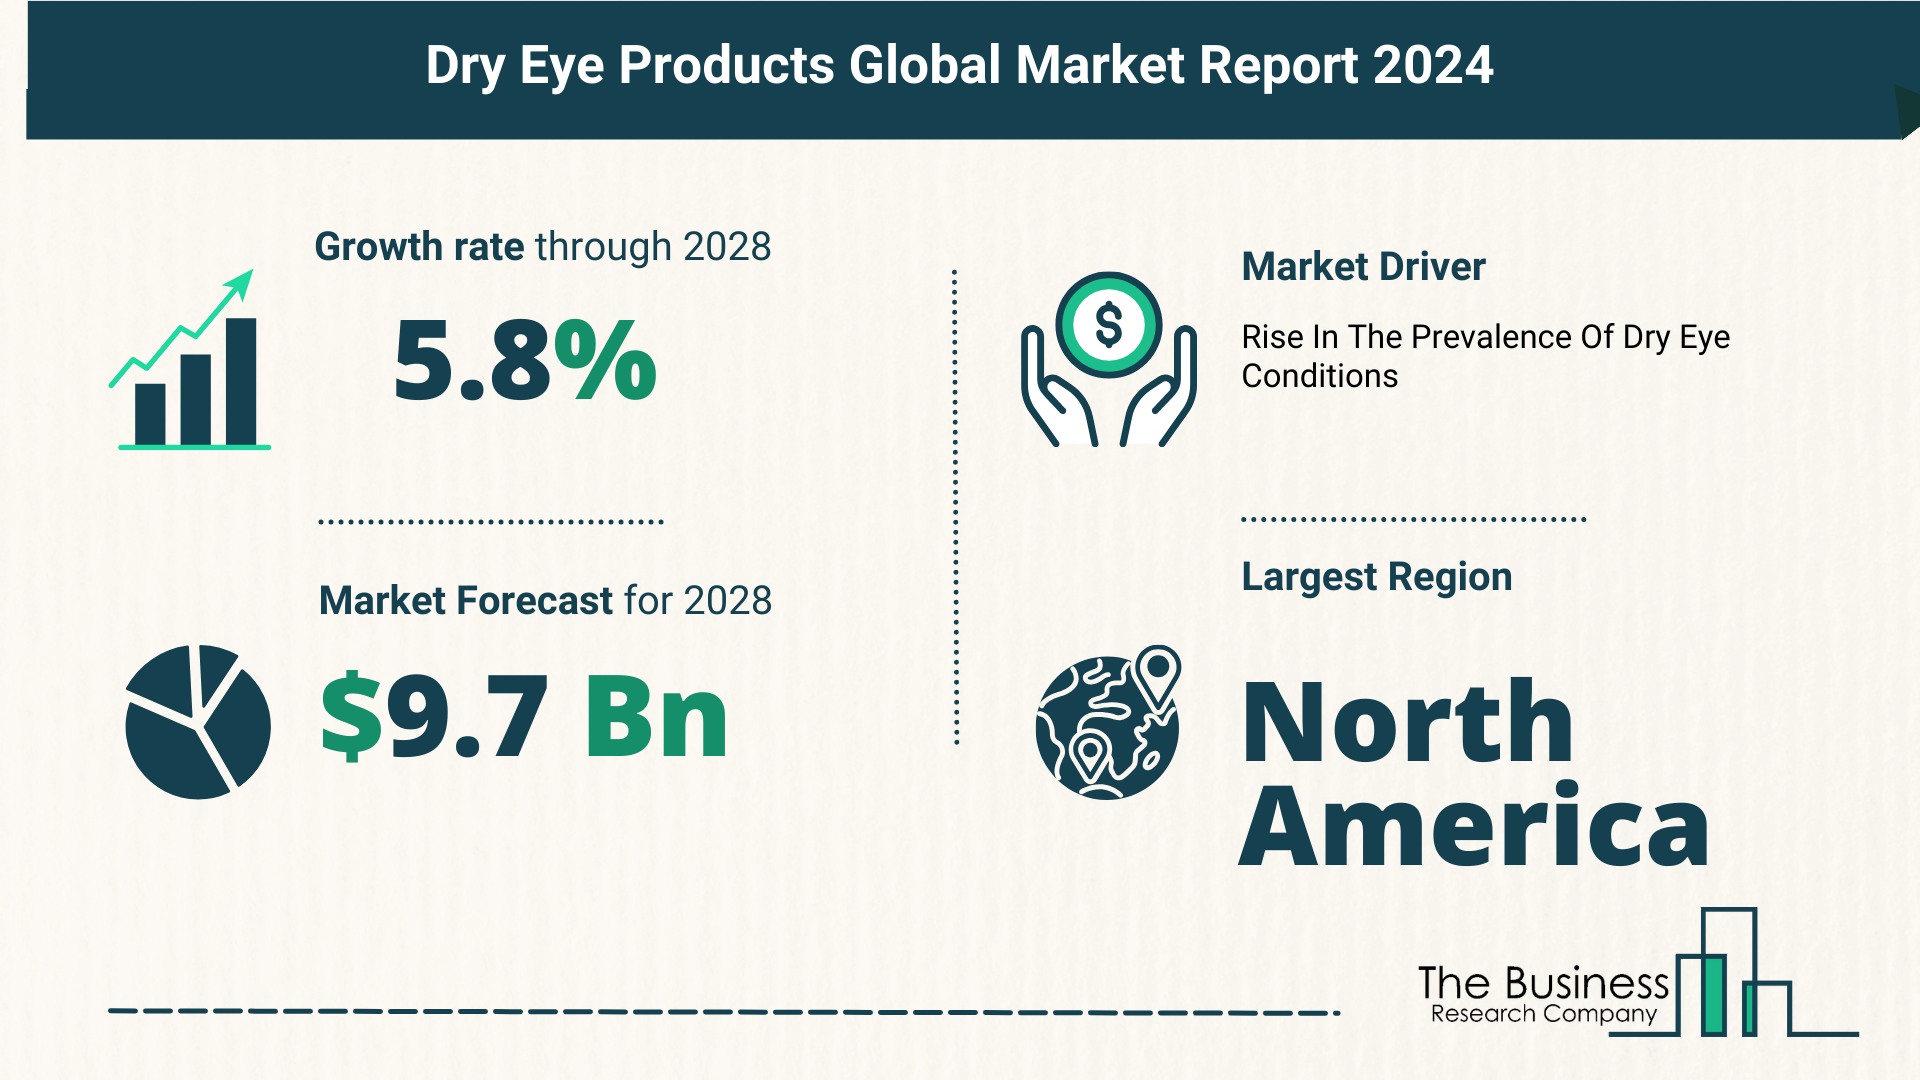 Key Trends And Drivers In The Dry Eye Products Market 2024